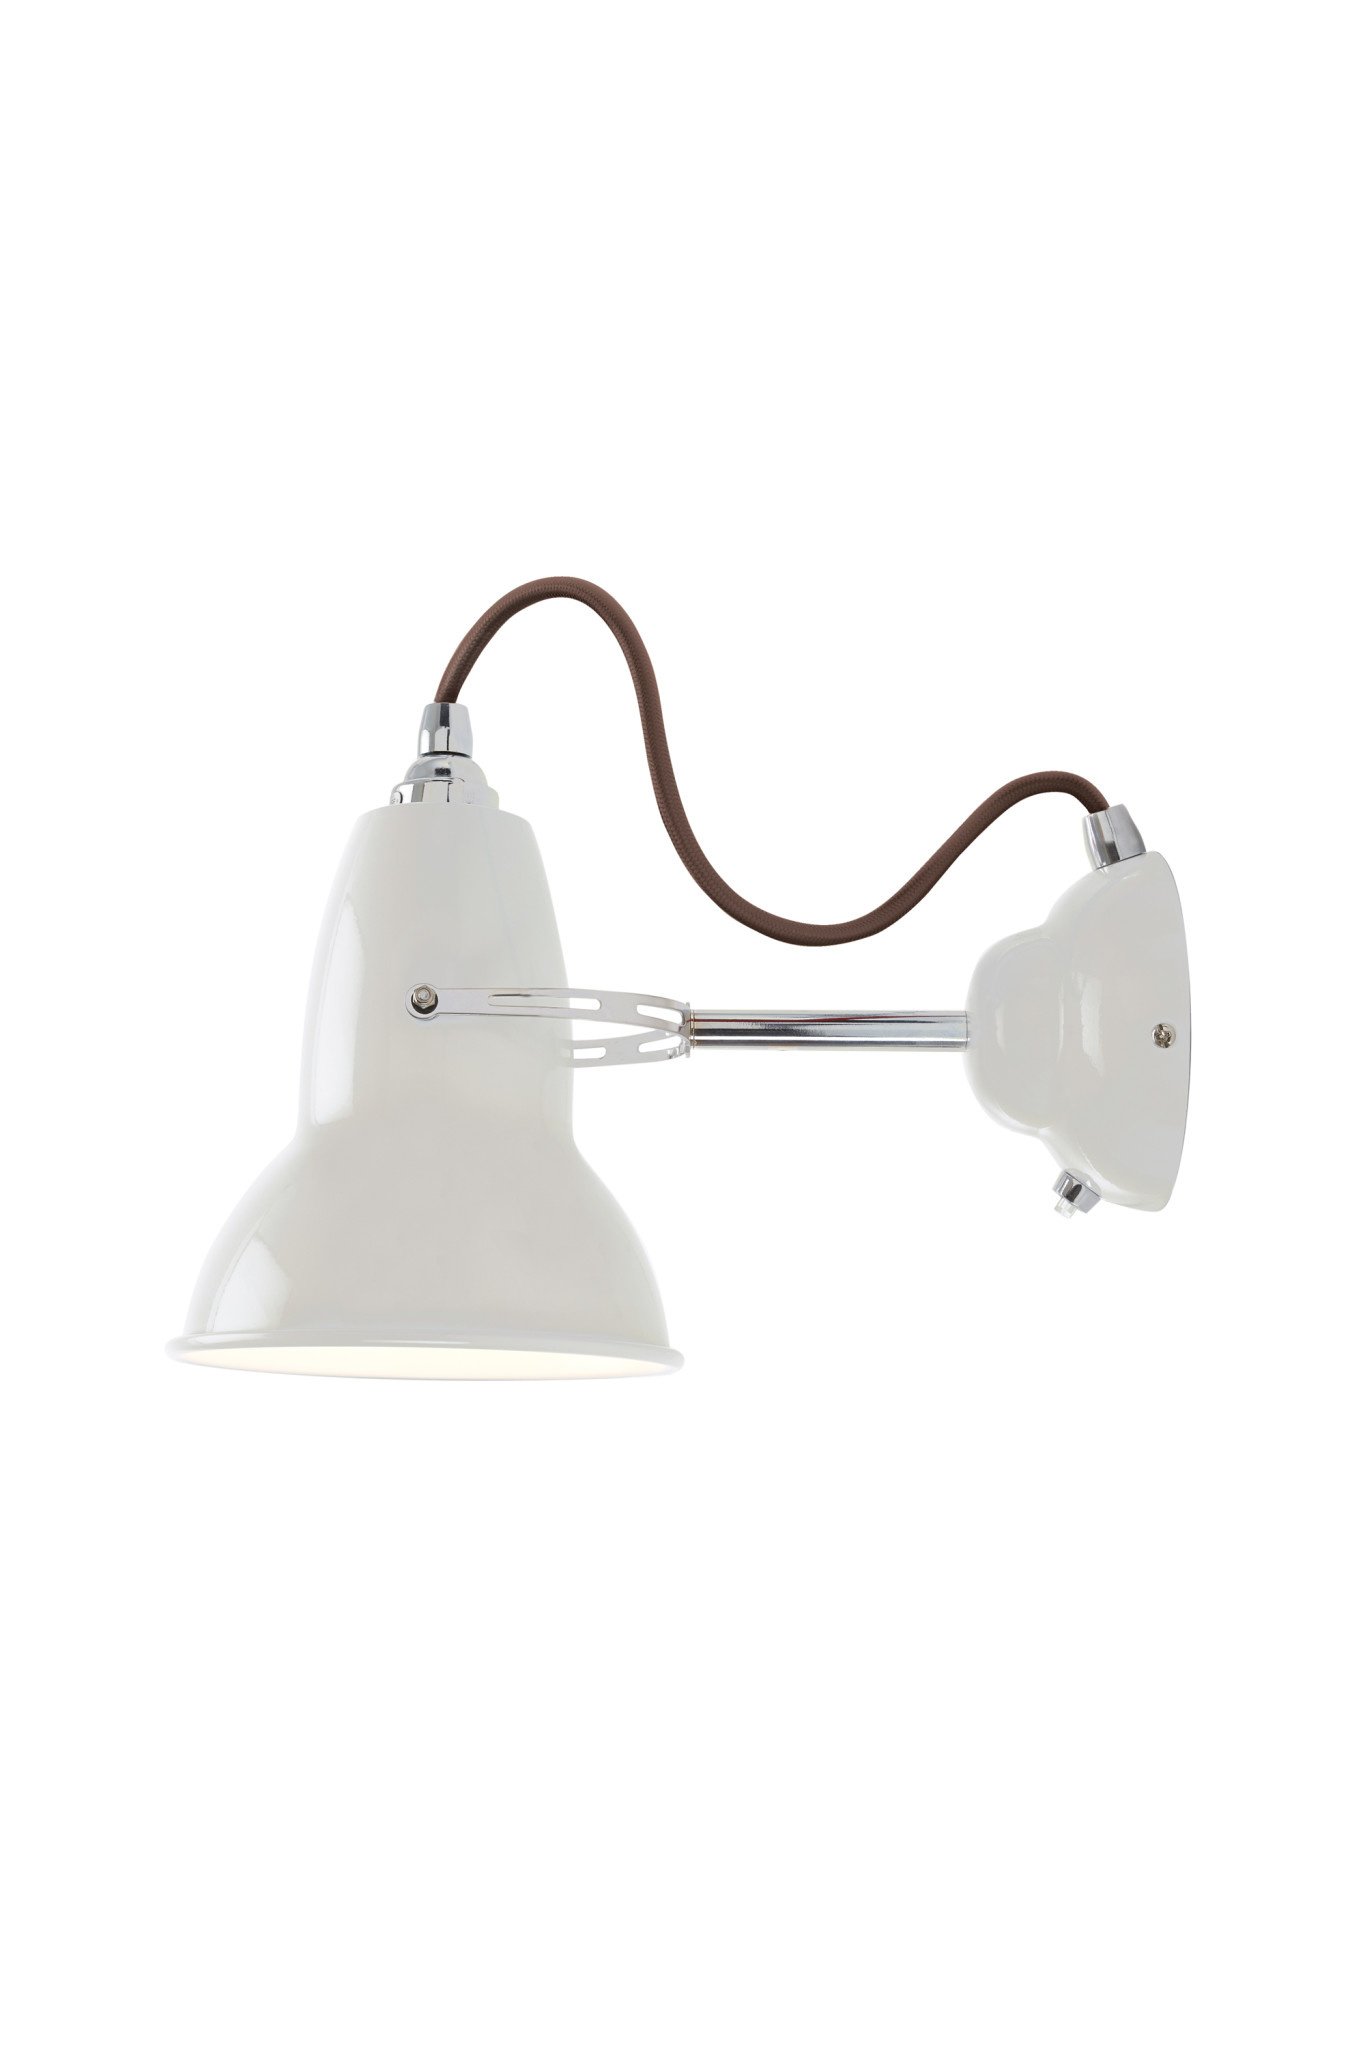 Anglepoise PREORDER Original 1227 Wall Light Sconce - Linen White with Chrome